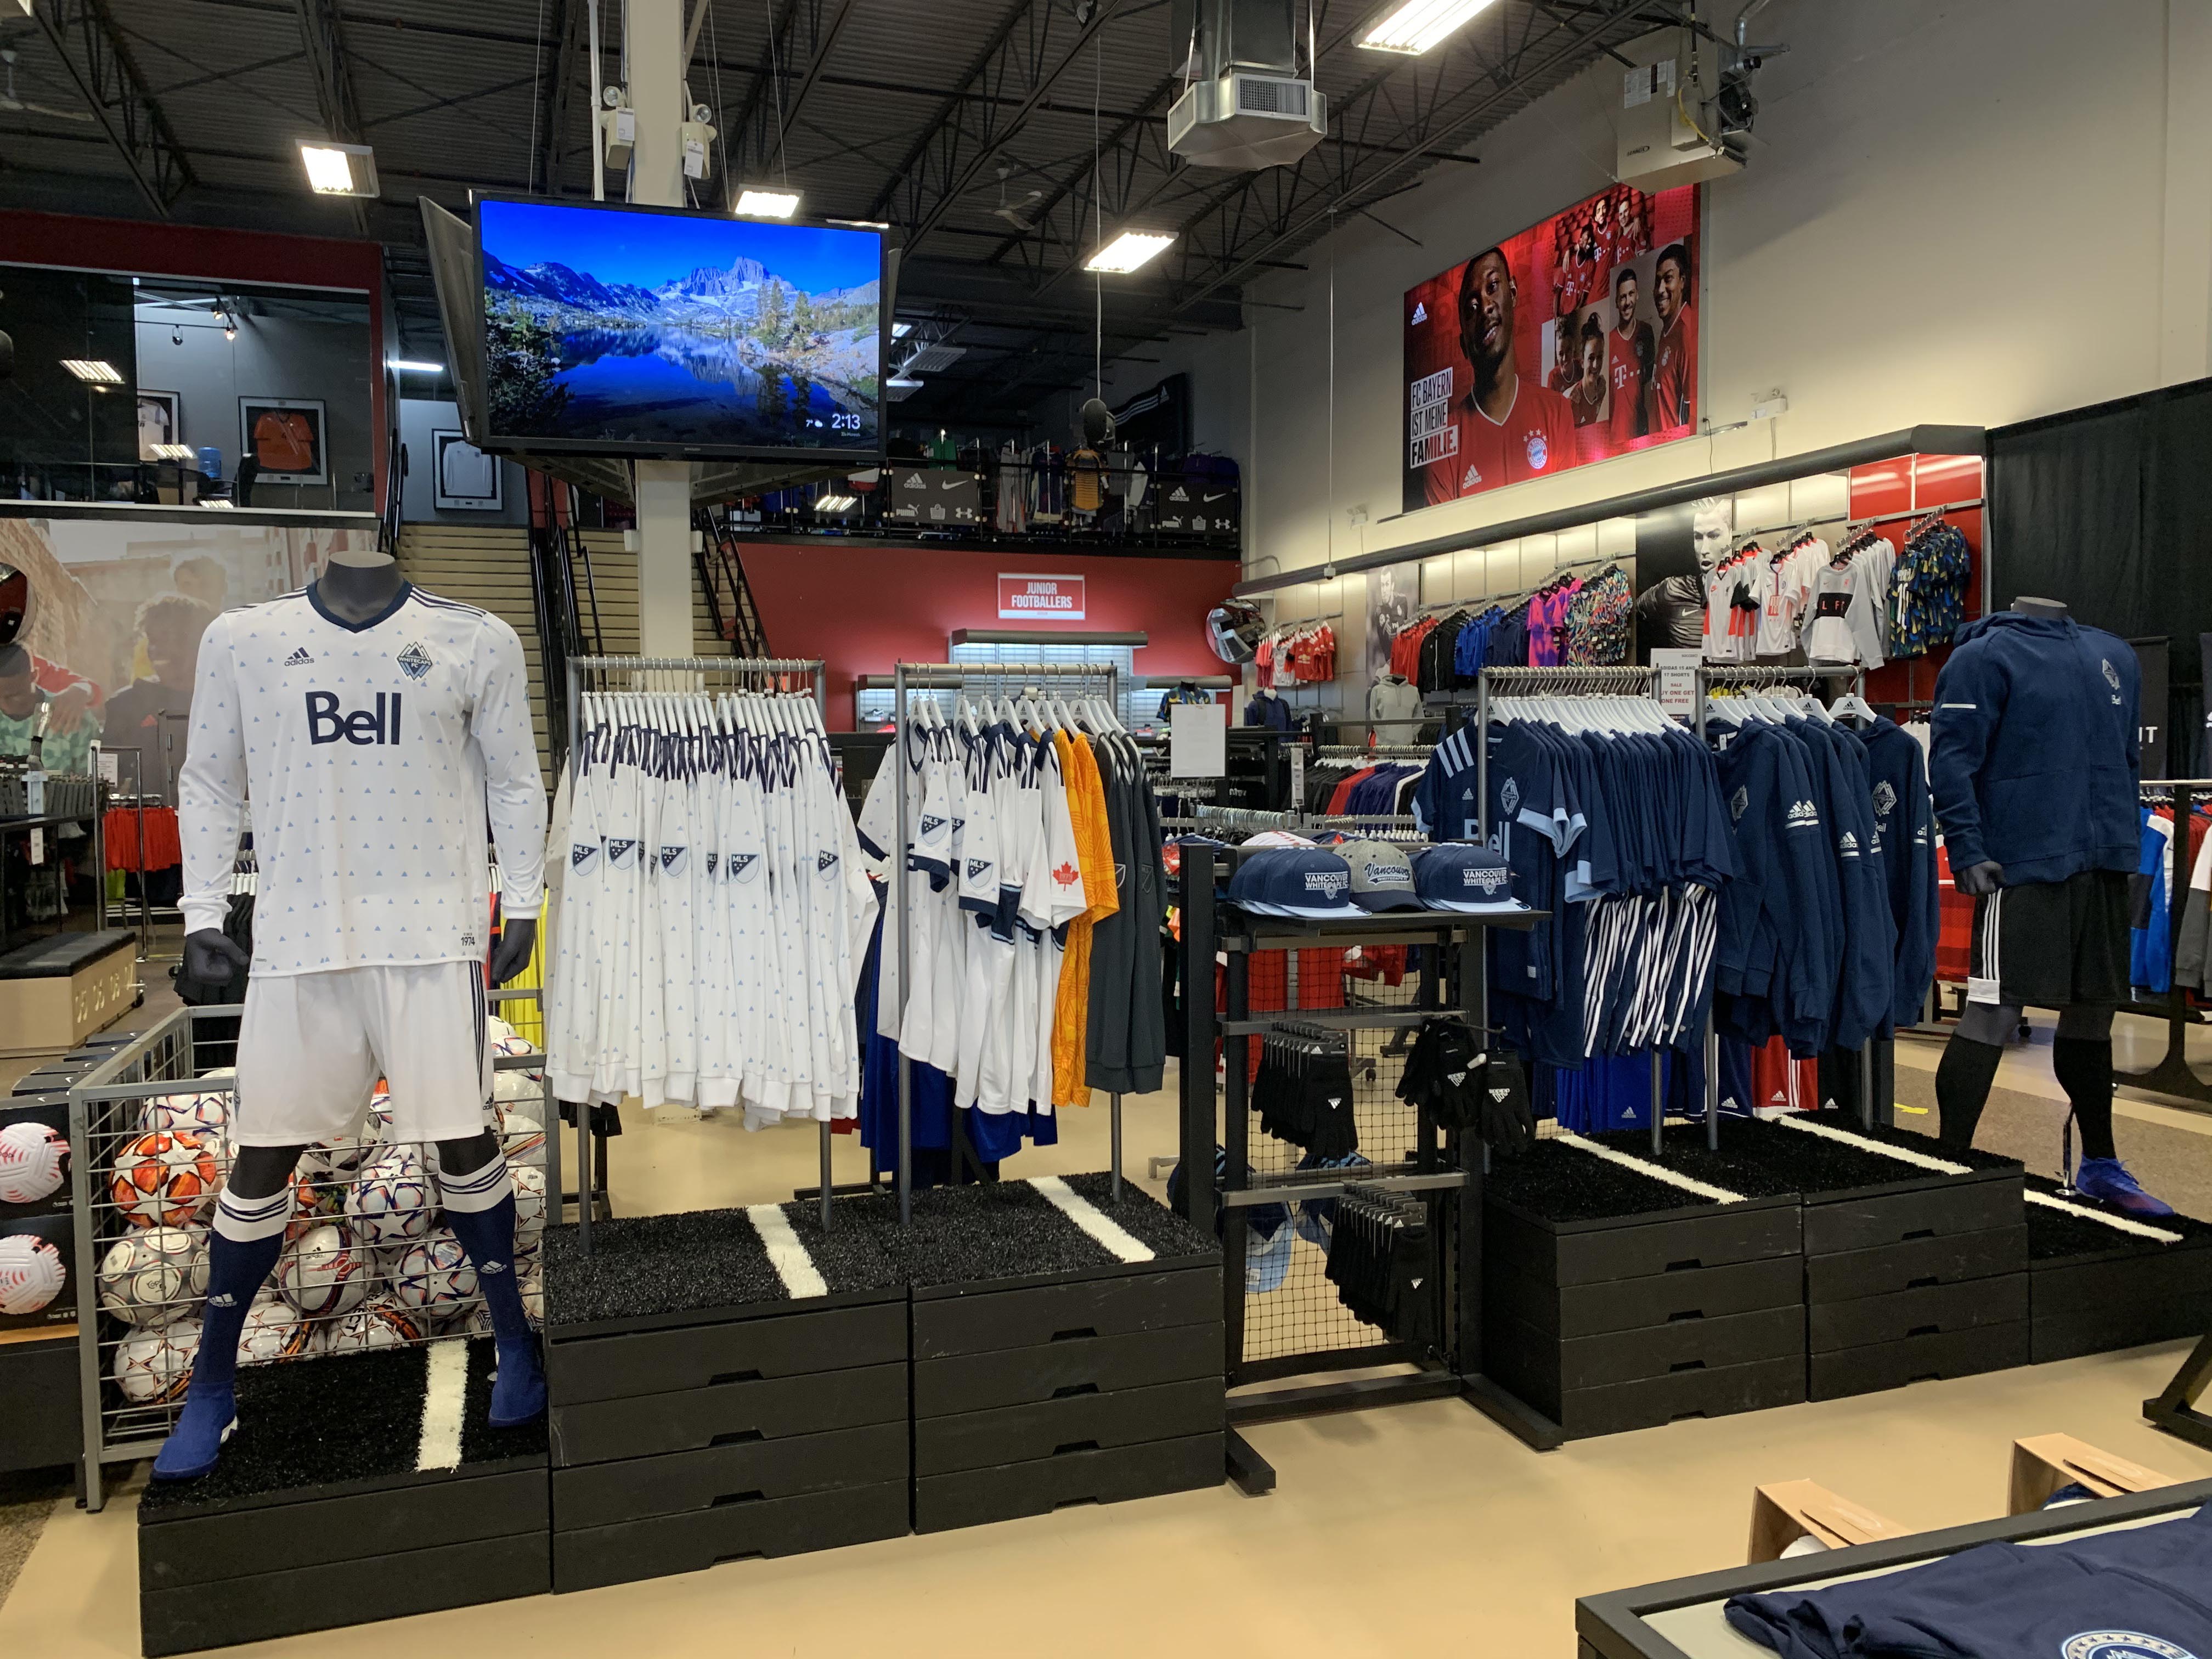 Canada's Largest Soccer Store